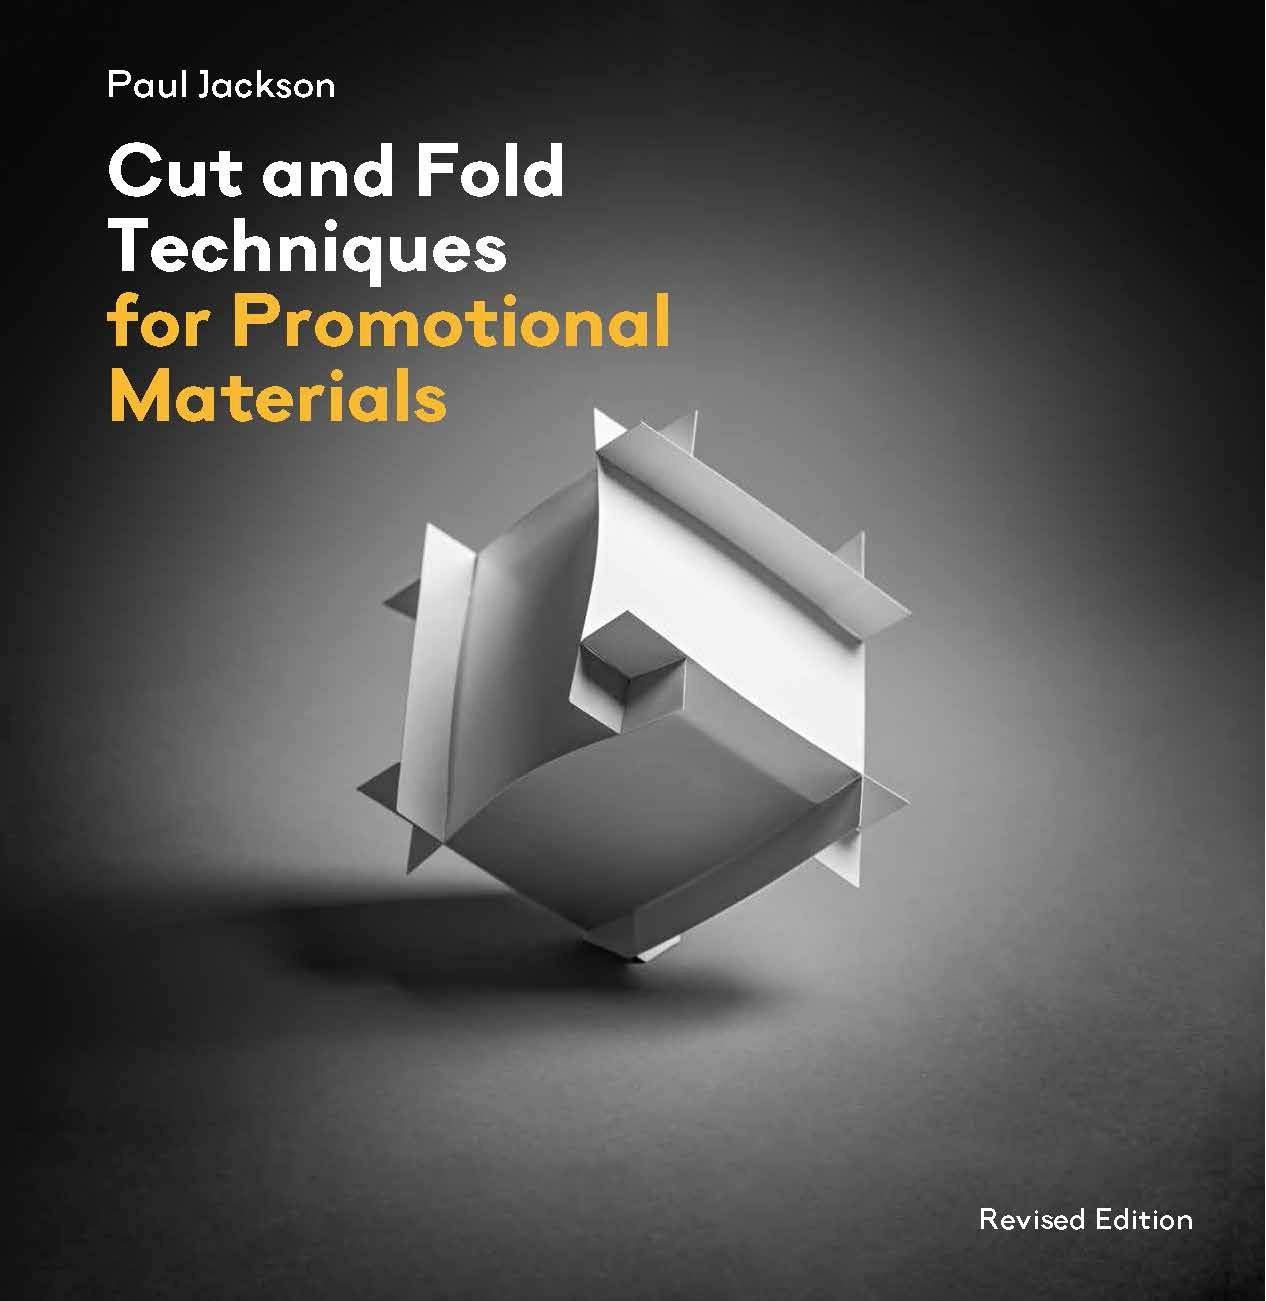  Cut and Fold Techniques for Promotional Materials : Revised edition_Paul Jackson_9781786272966_Laurence King Publishing 